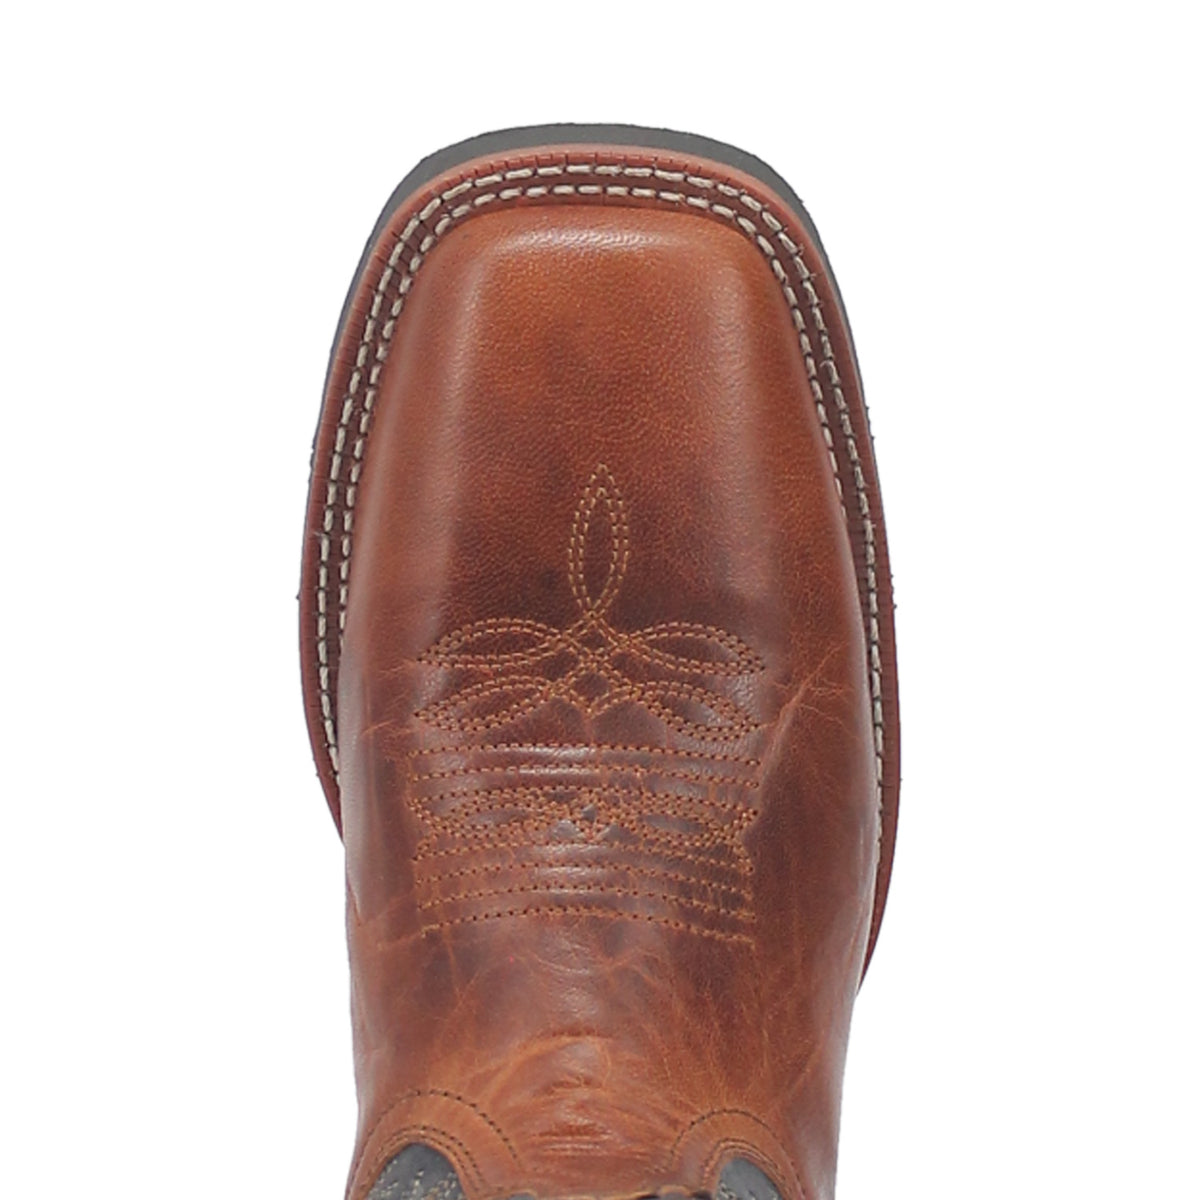 ROSS LEATHER BOOT Cover